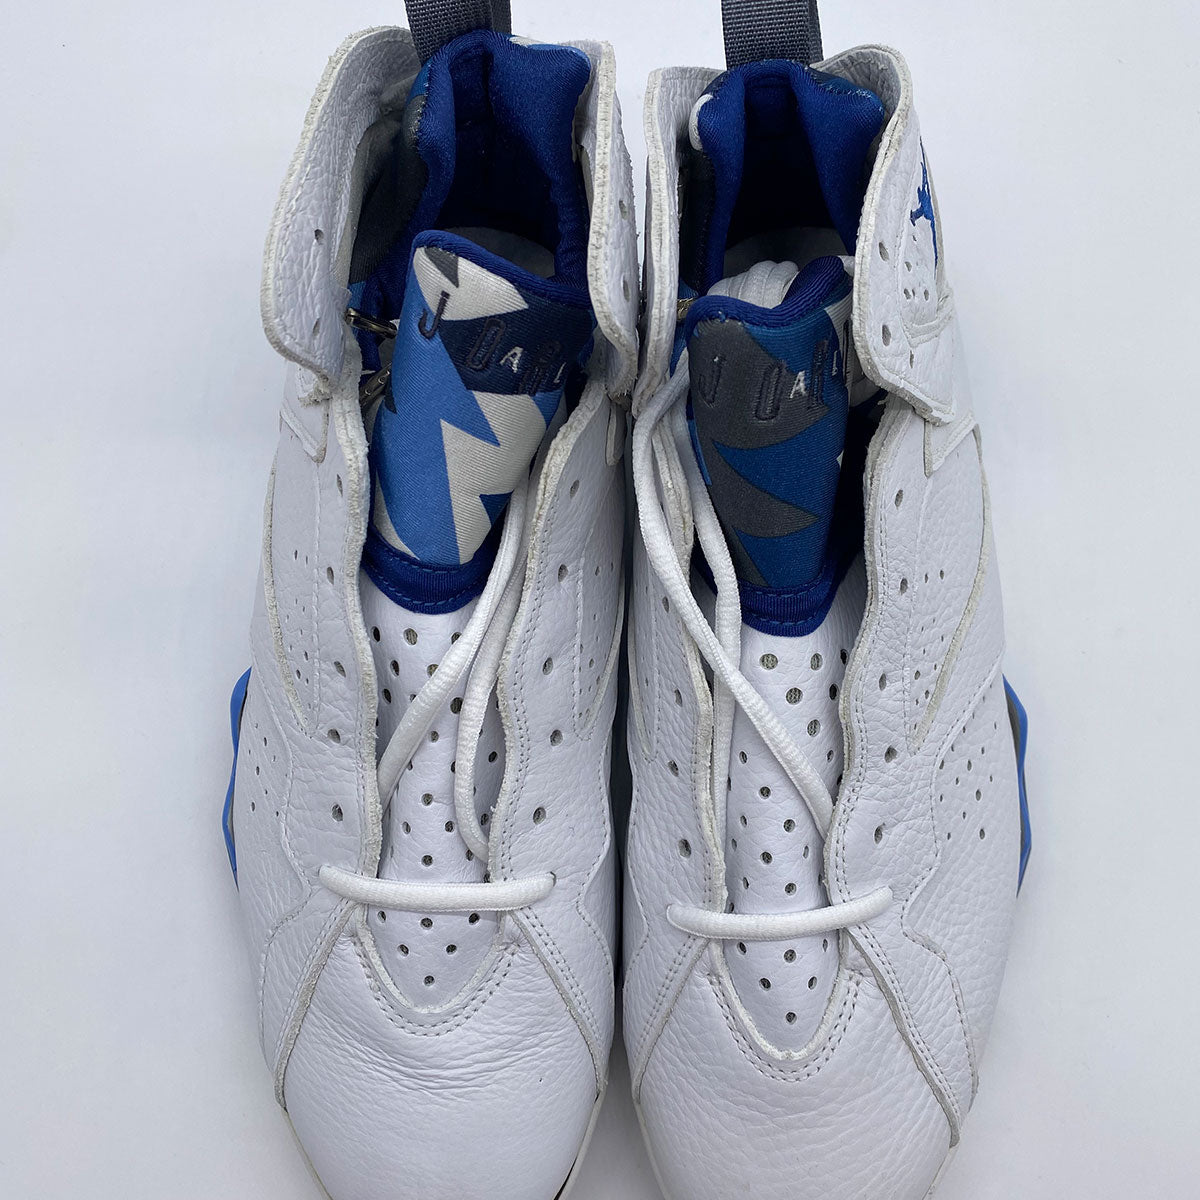 Air Jordan 7 Retro French Blue 2002 Release size 9.5 (New with DEFECT) - KickzStore